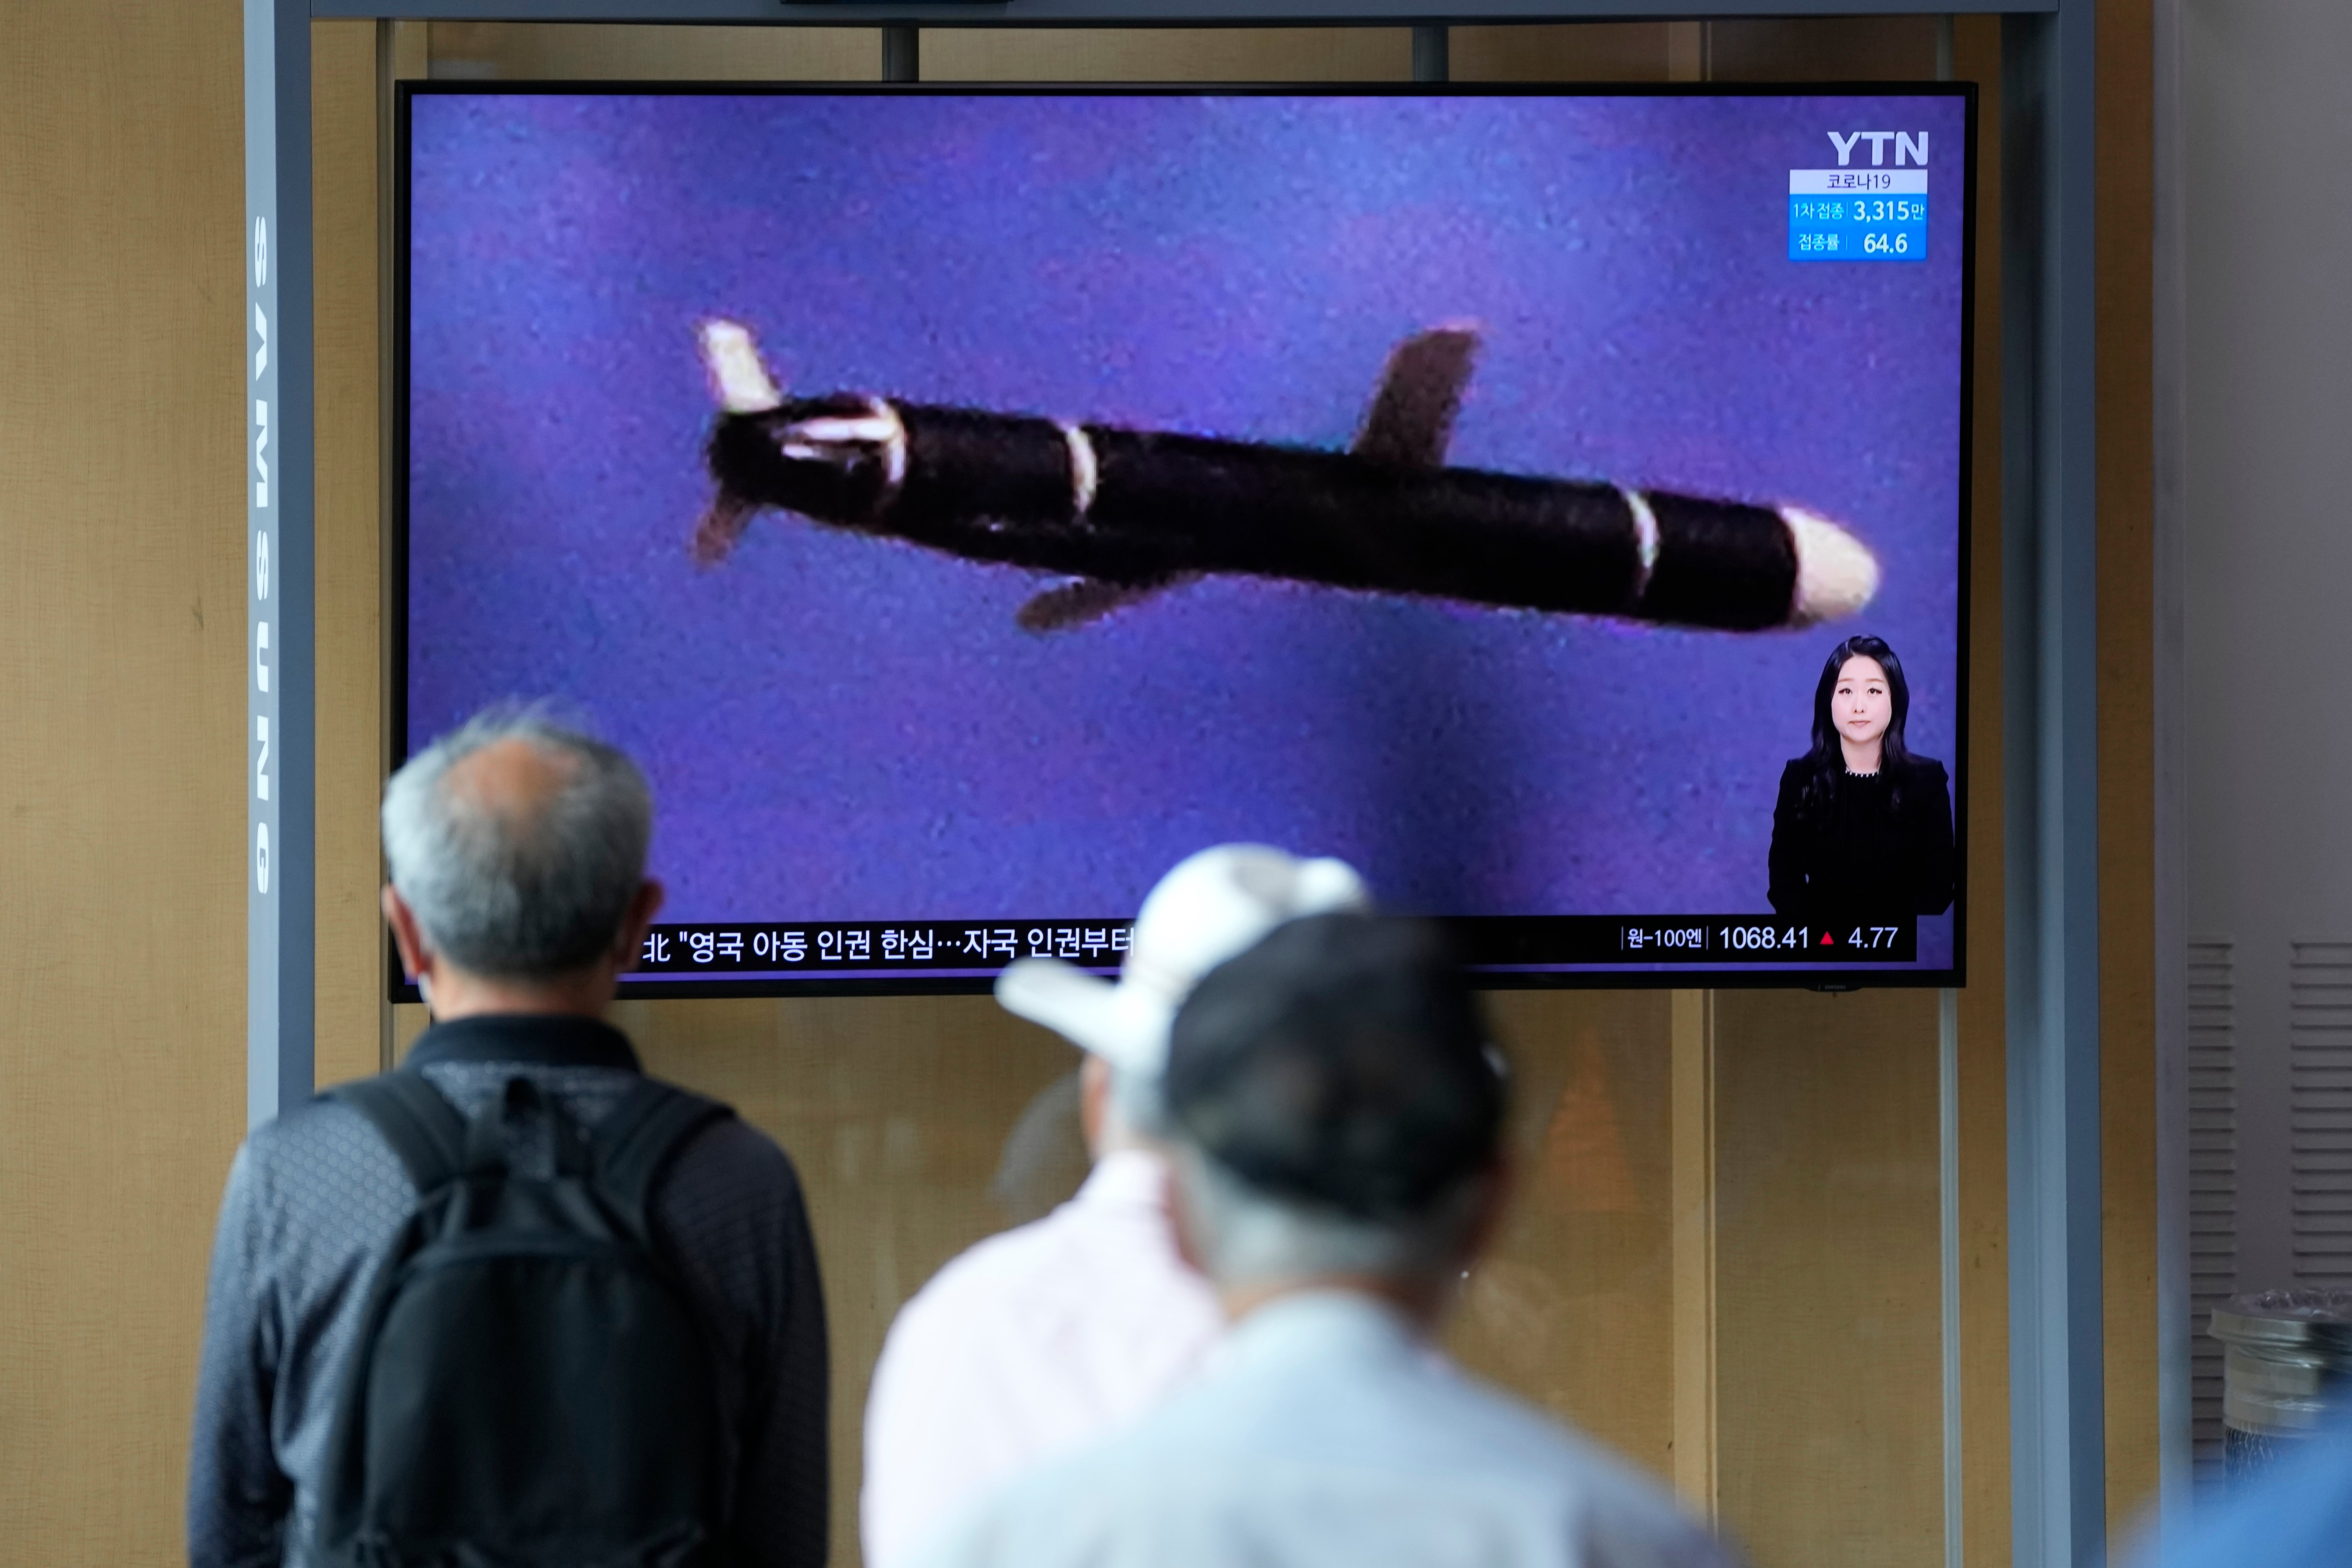 Seoul residents watch a news programme featuring a North Korean photo captioned, ‘North Korea’s long-range cruise missiles tests’